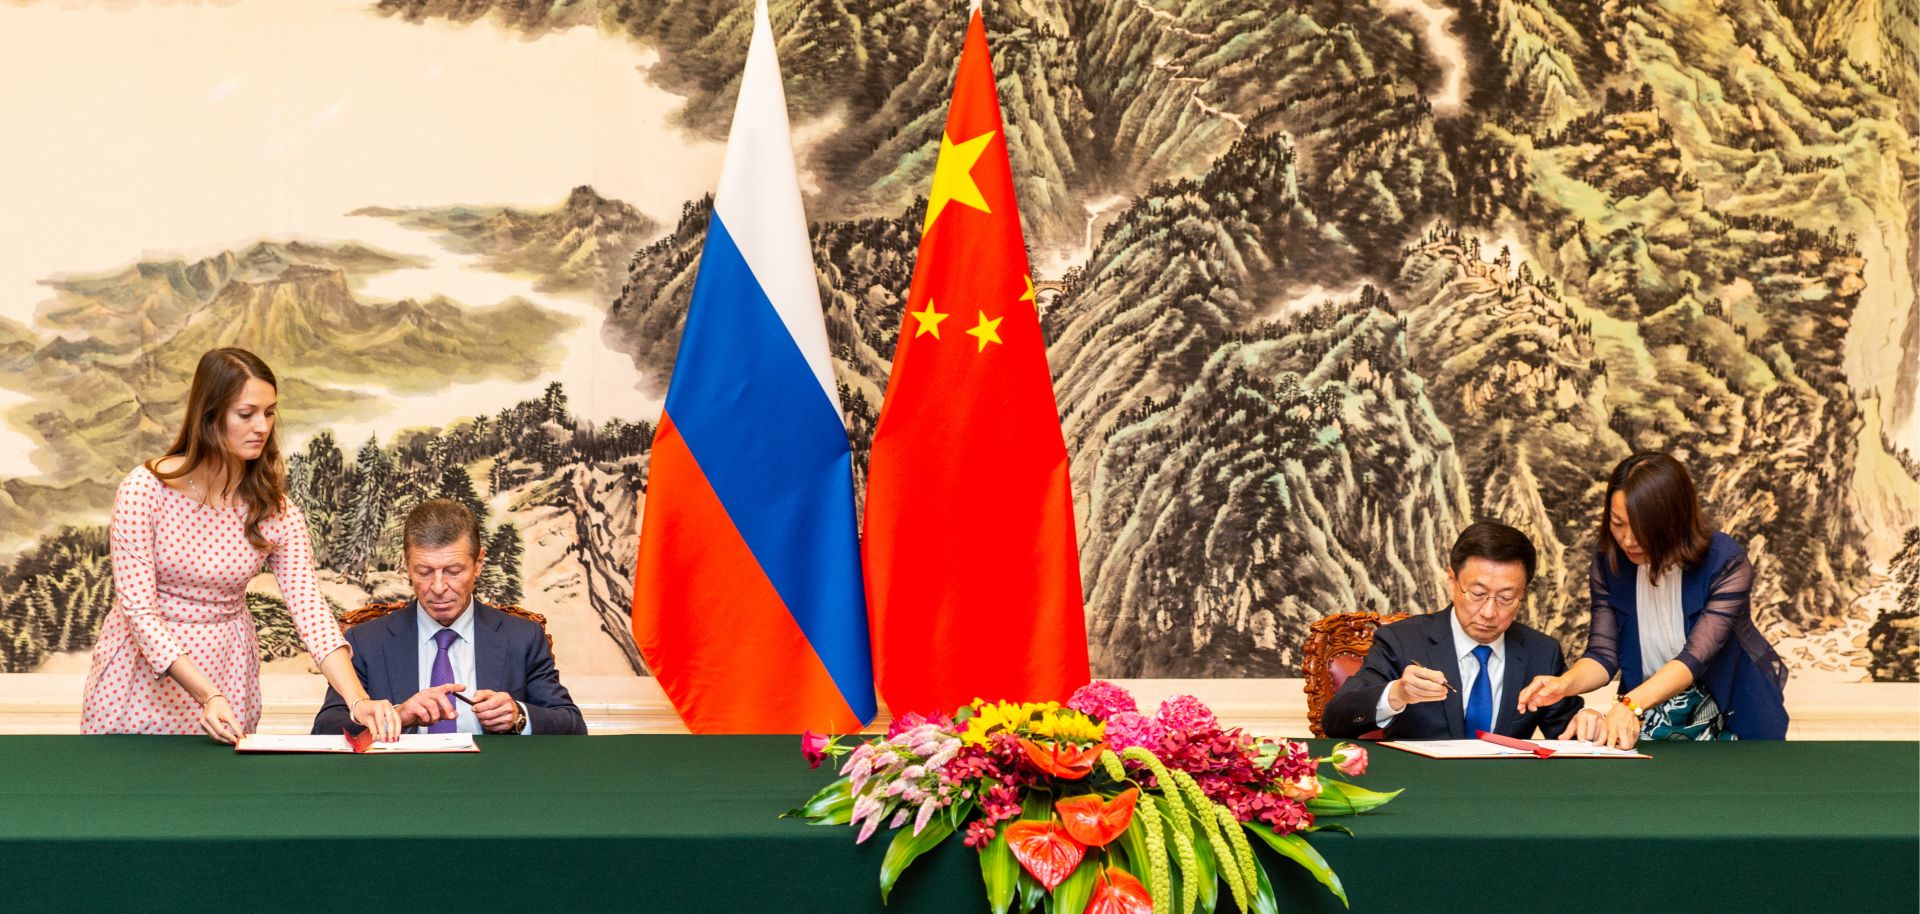 Russian Deputy Prime Minister Dmitry Kozak (seated, right) and Chinese Vice Premier Han Zheng (seated, left) sign joint documents following a meeting in Beijing on Sept. 6, 2019. Both officials are seated next to their countries respective national flags.